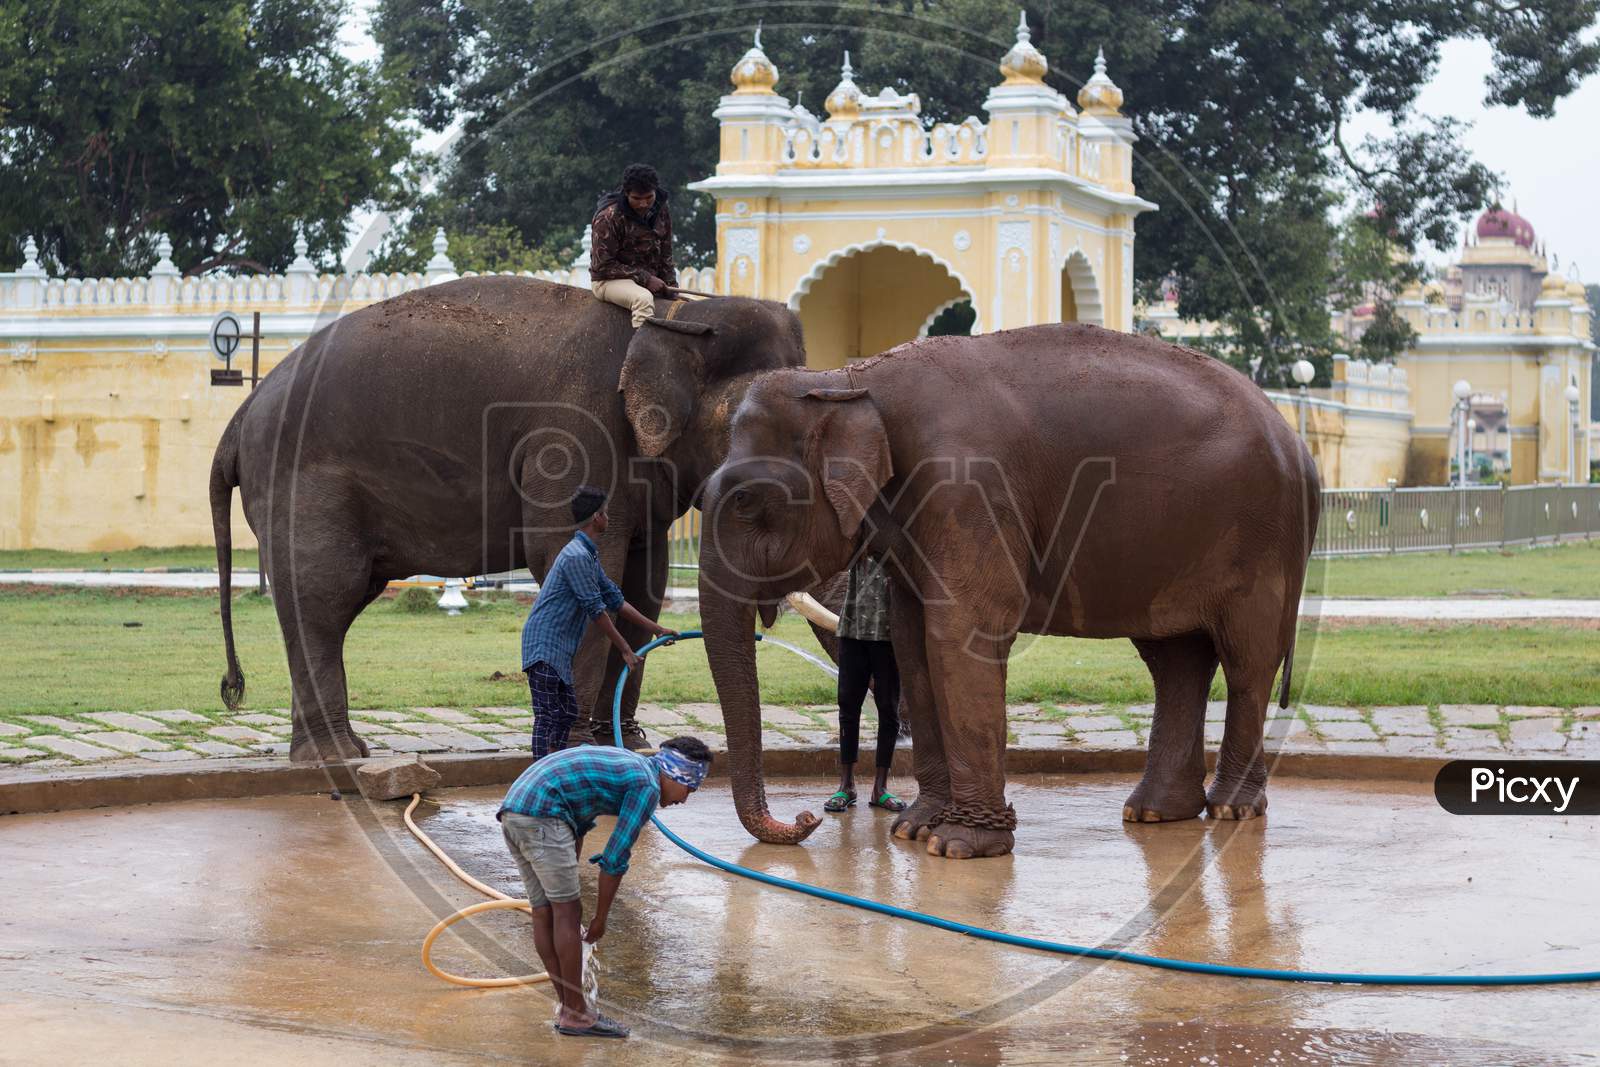 Mahouts or Elephant Handlers seen with the Pachyderms in the water pond inside Palace premises during the Dasara Festival at Mysuru in Karnataka/India.